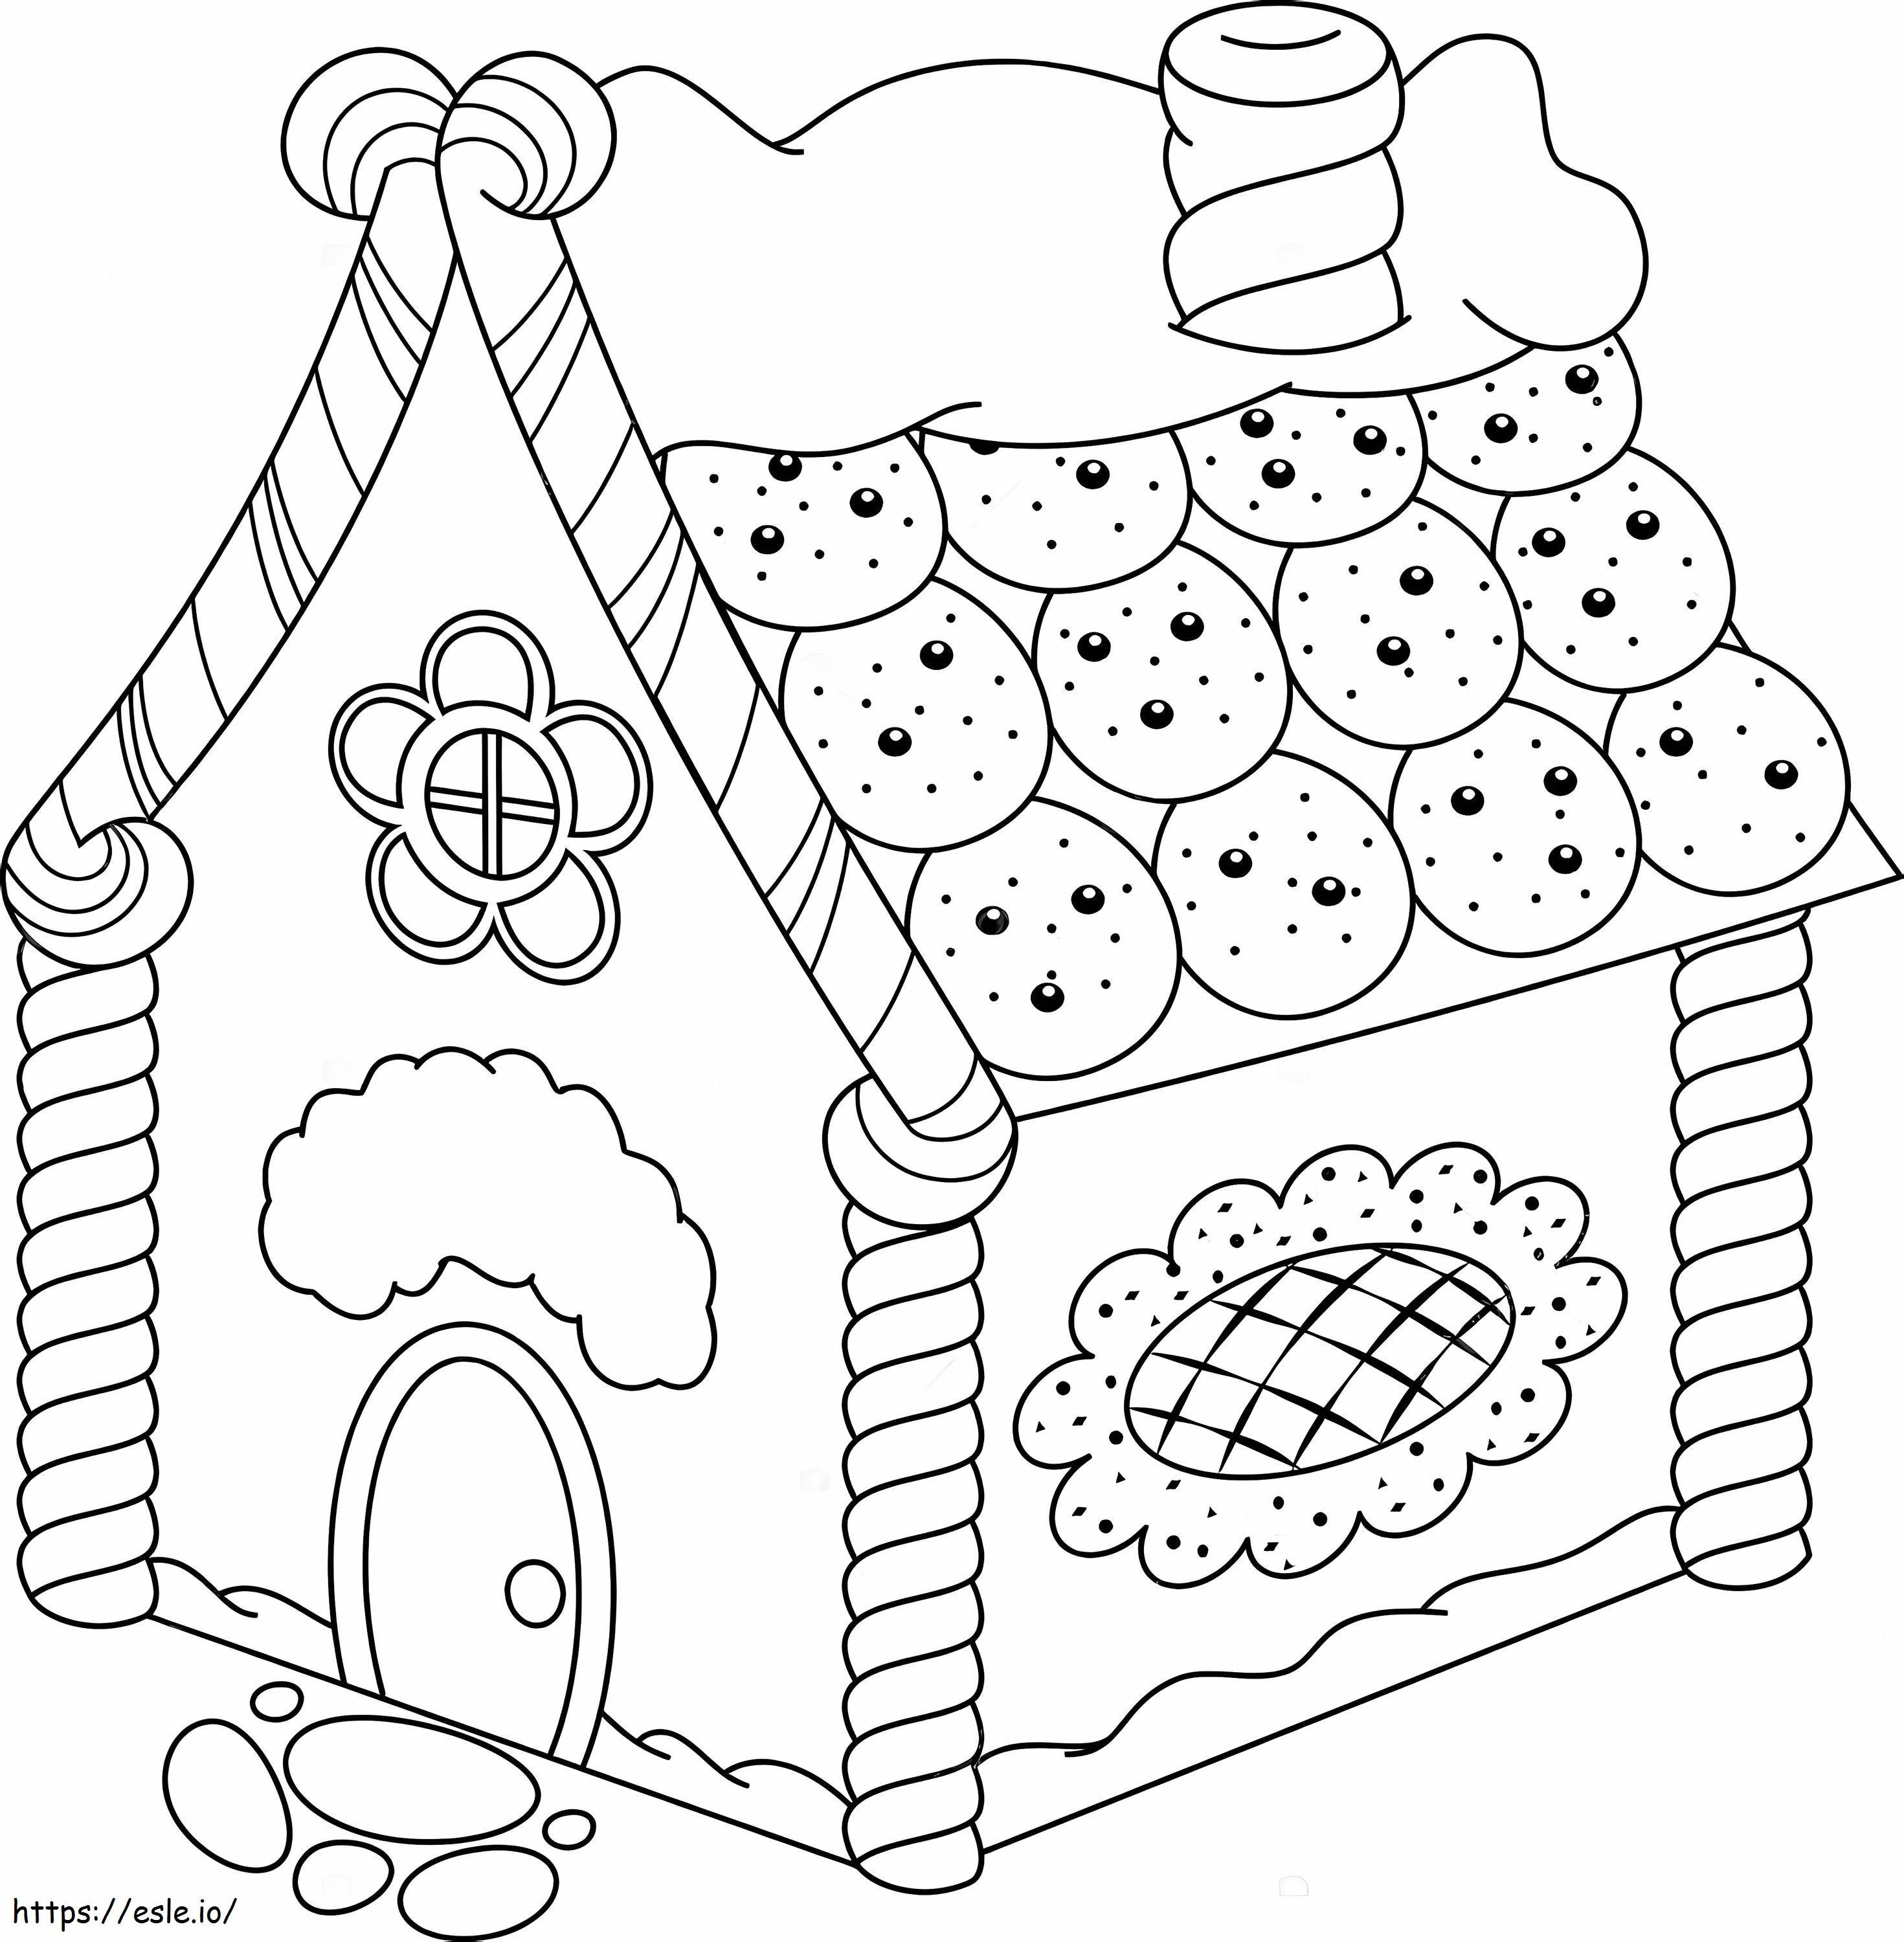 Candy House For Christmas coloring page